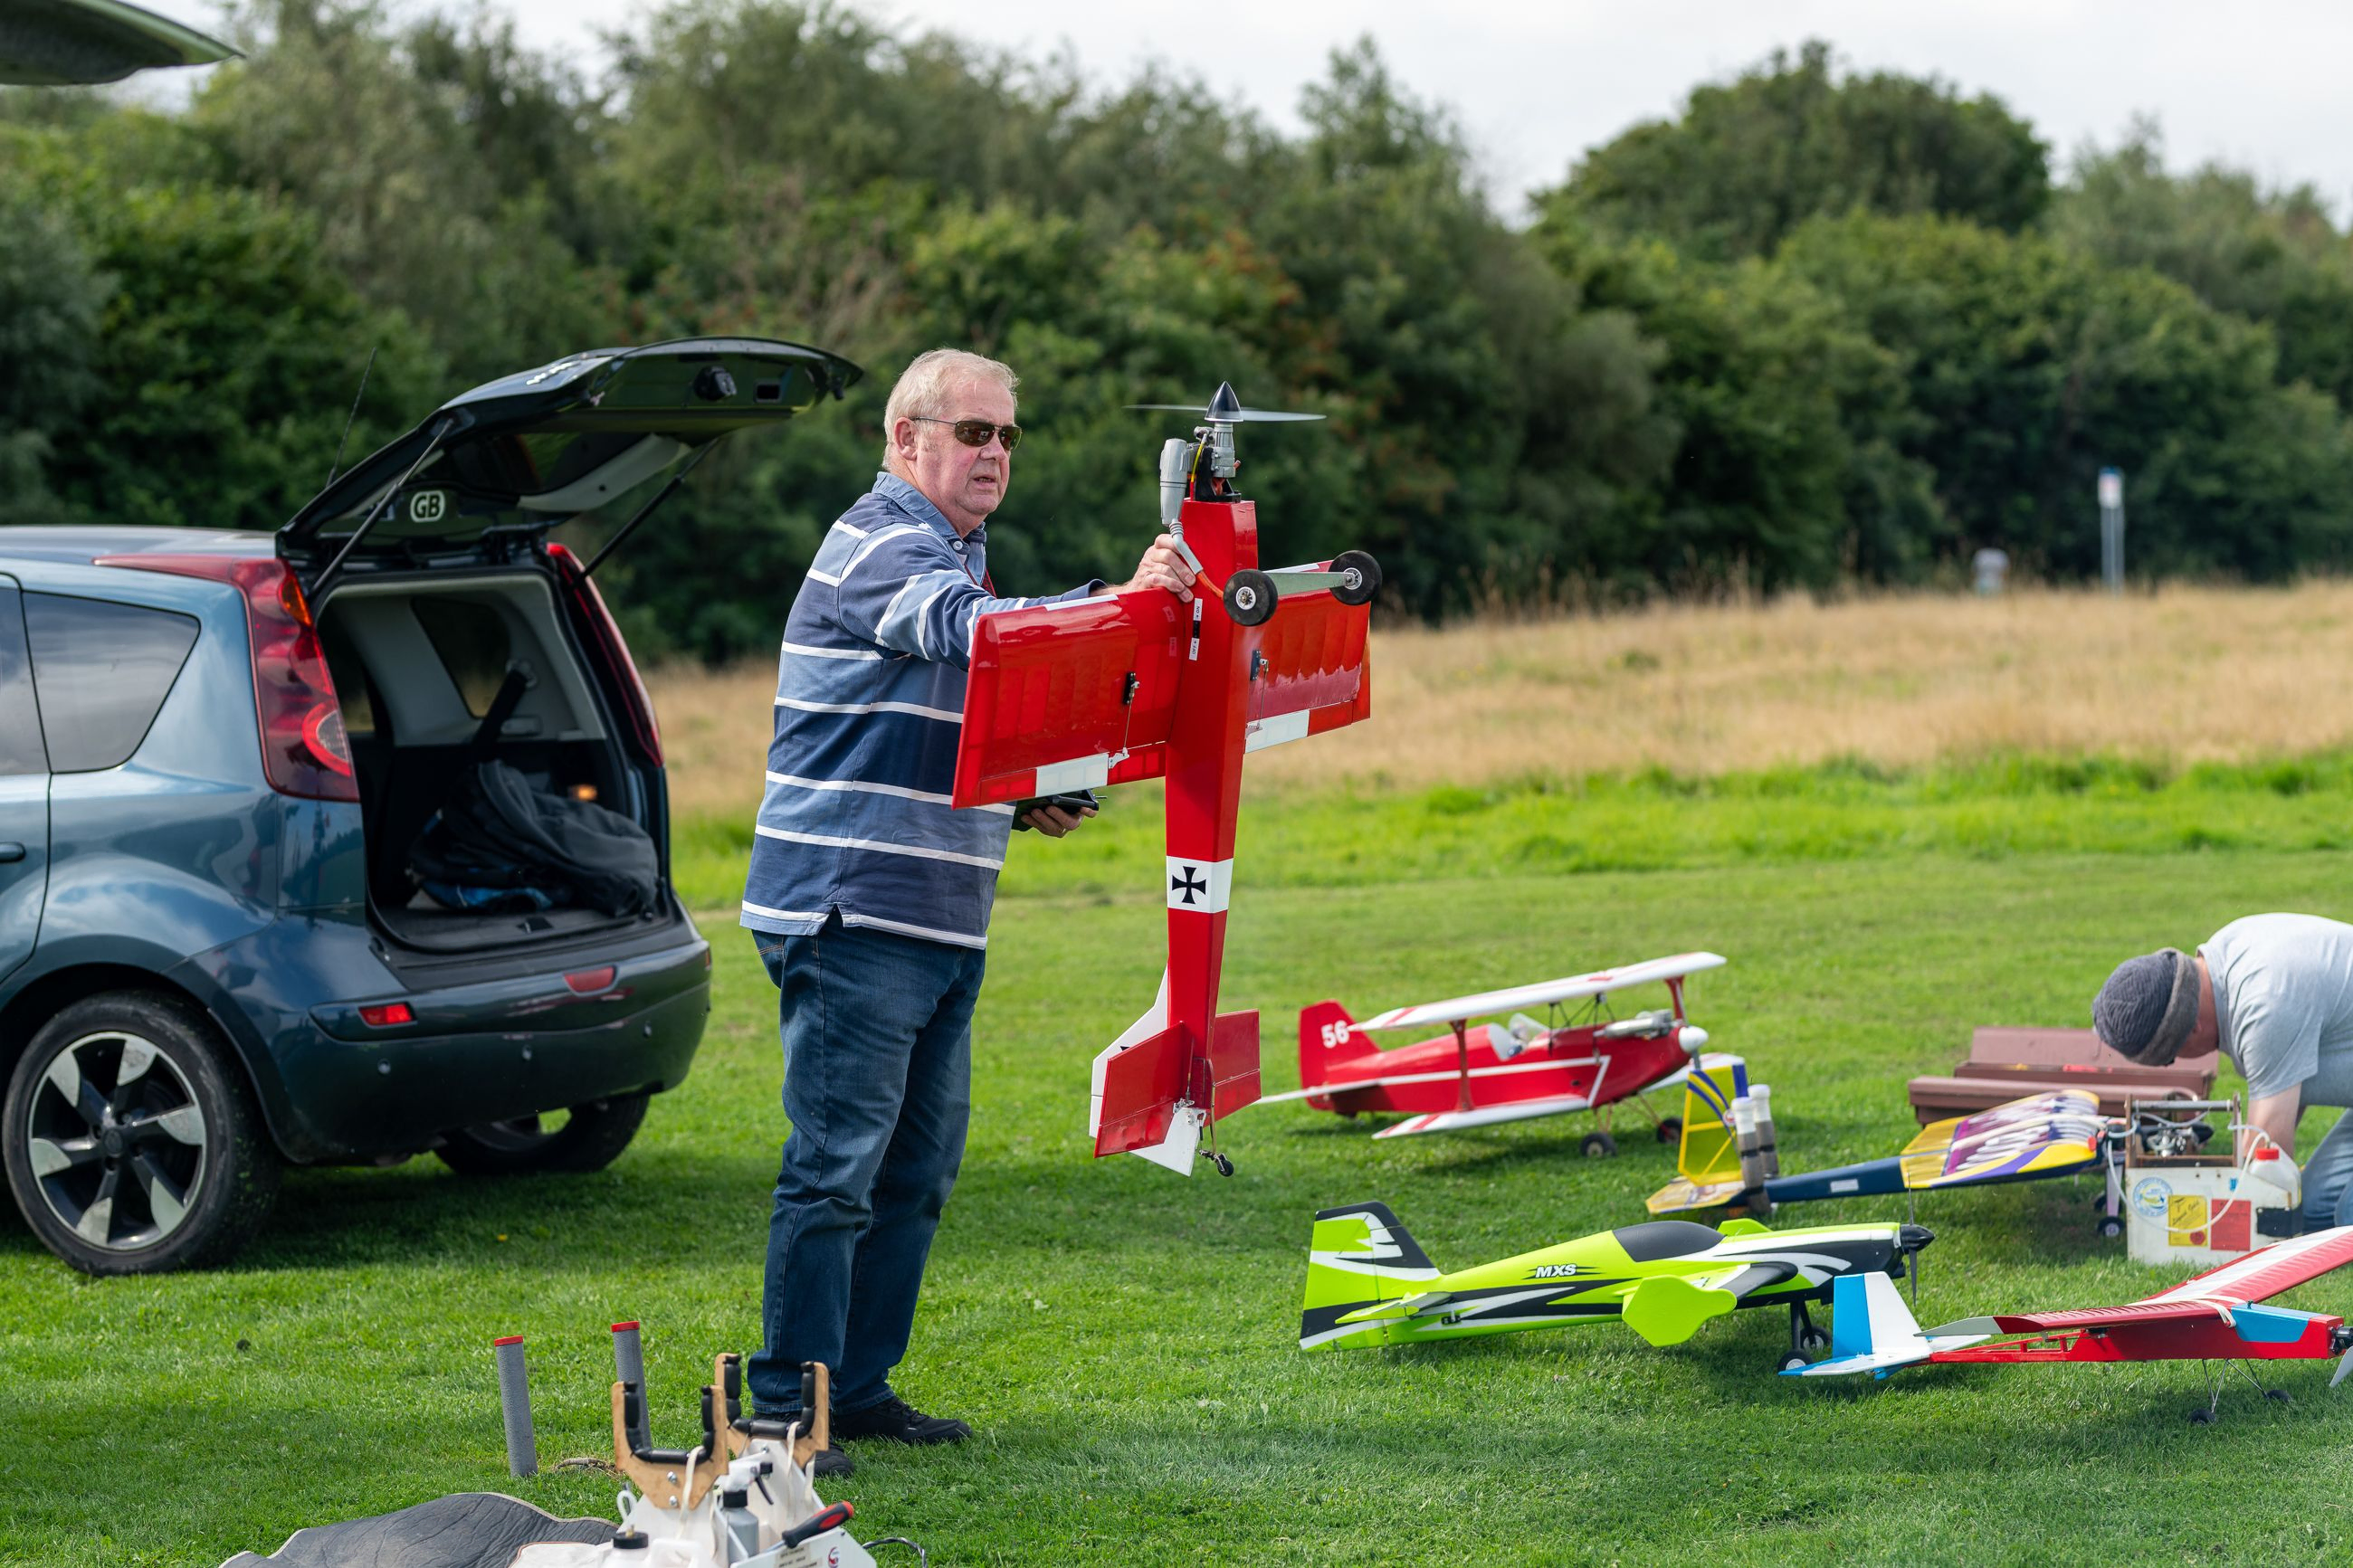 Man holding a red RC plane